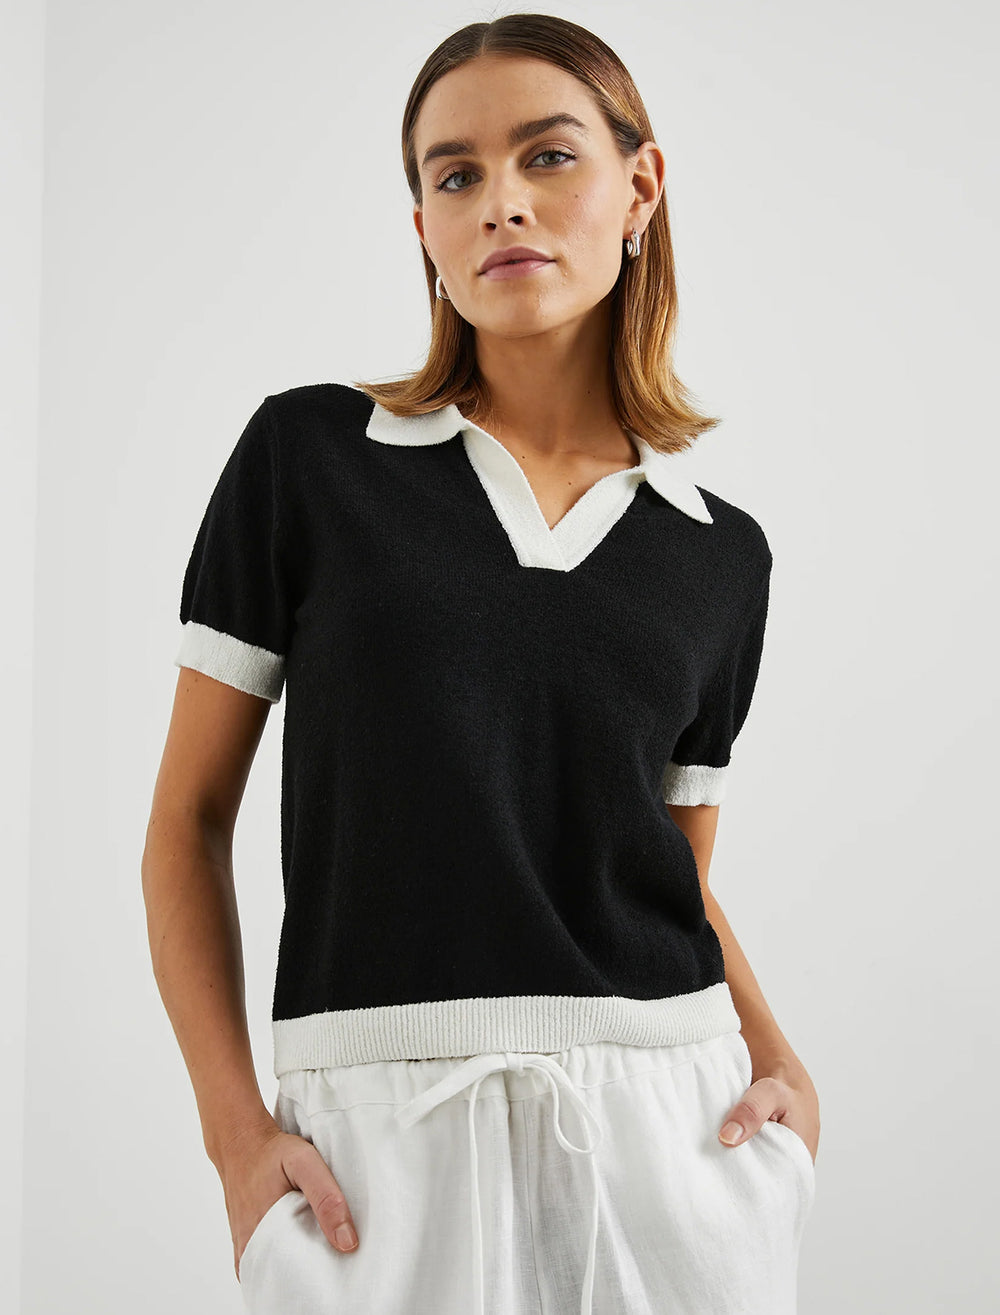 Model wearing Rails' arya knit top in black and white.